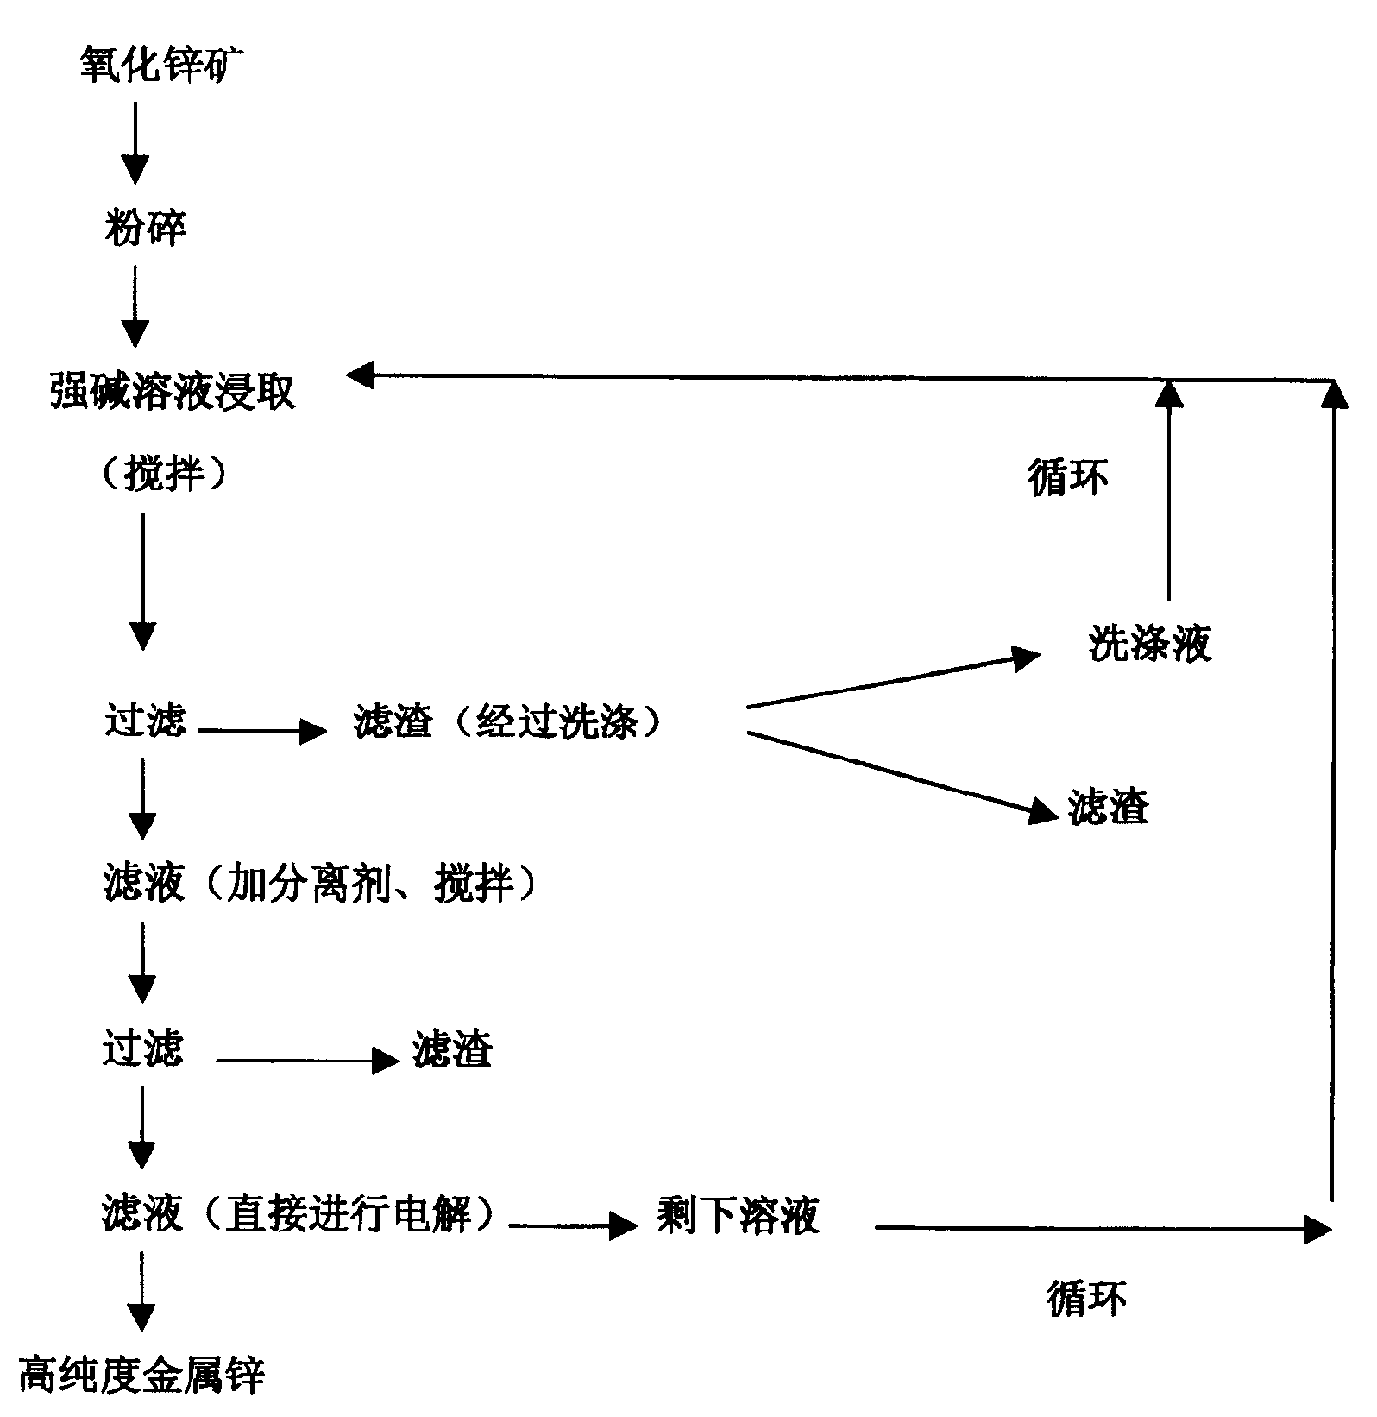 Method for producing high purity metal zinc from zinc oxide ore